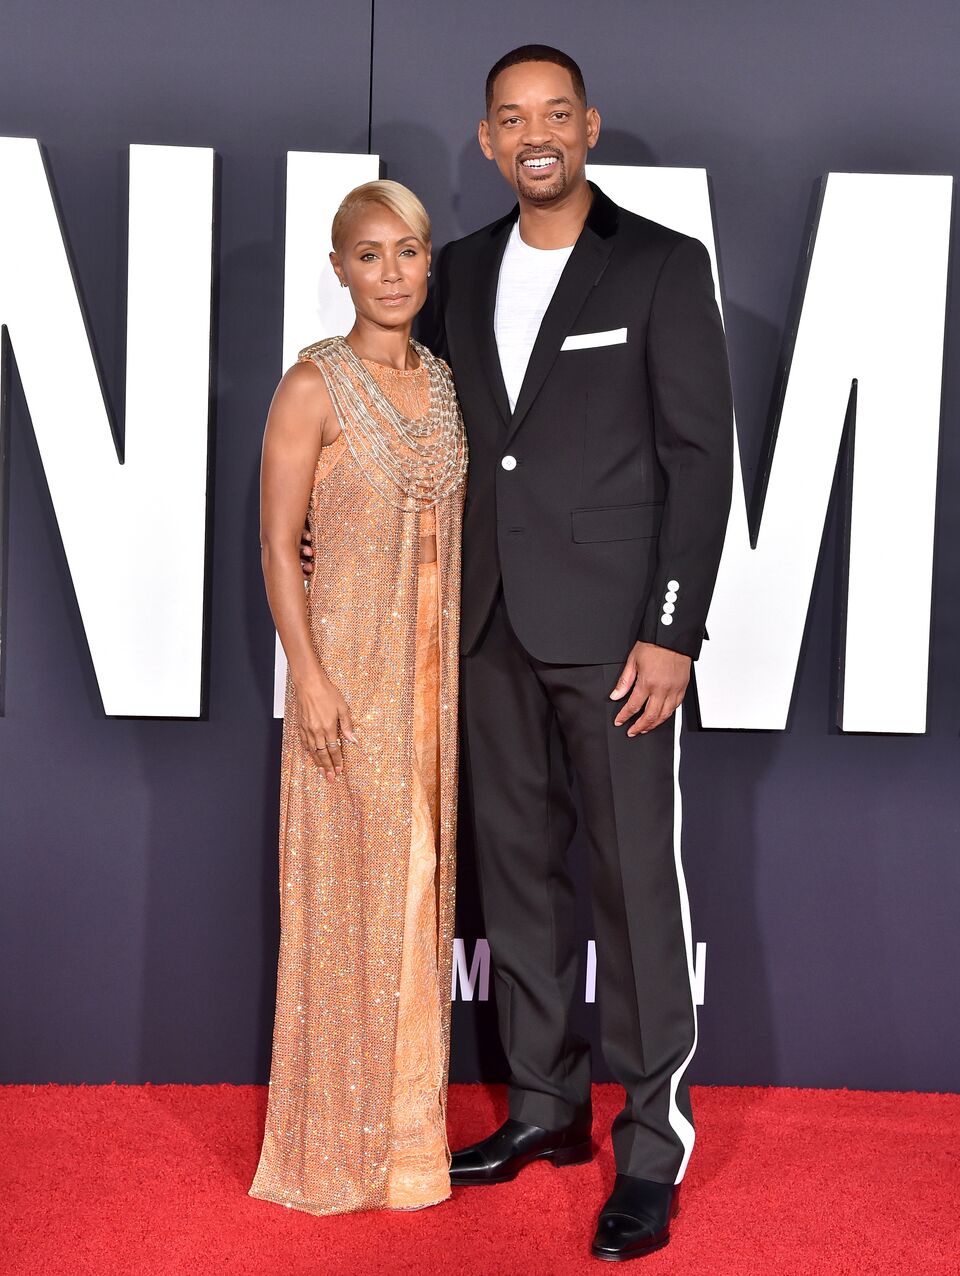 Jada Pinkett Smith and Will Smith attend Paramount Pictures' Premiere of "Gemini Man." | Source: Getty Images